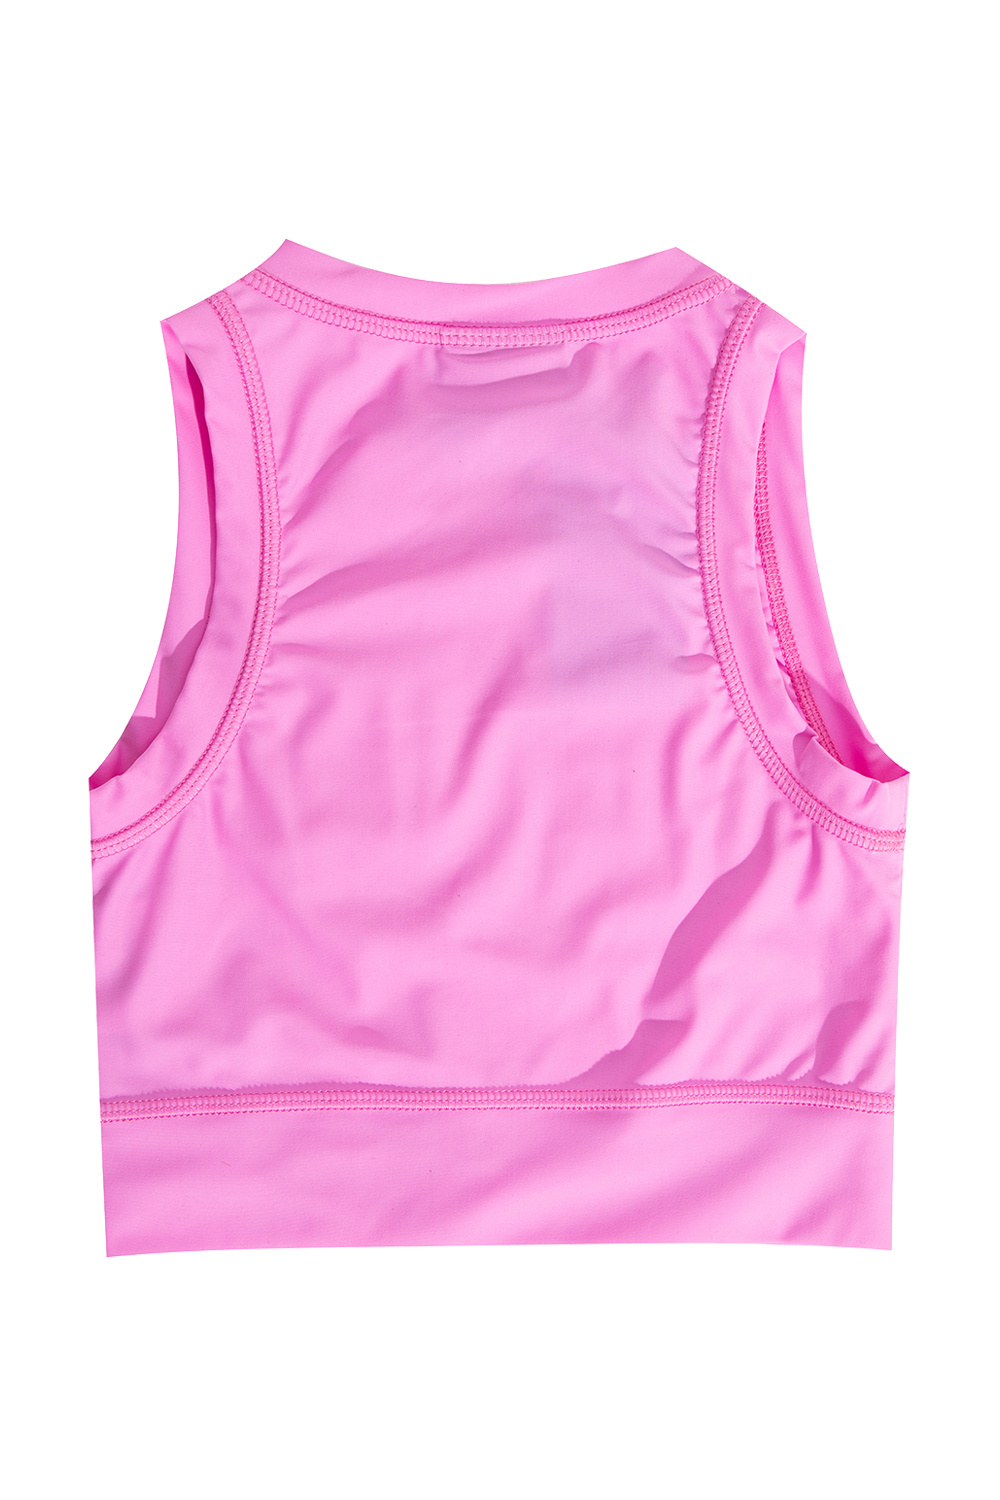 Kids pink sports bra CHEER - last pieces Garment size 140 Color Pink